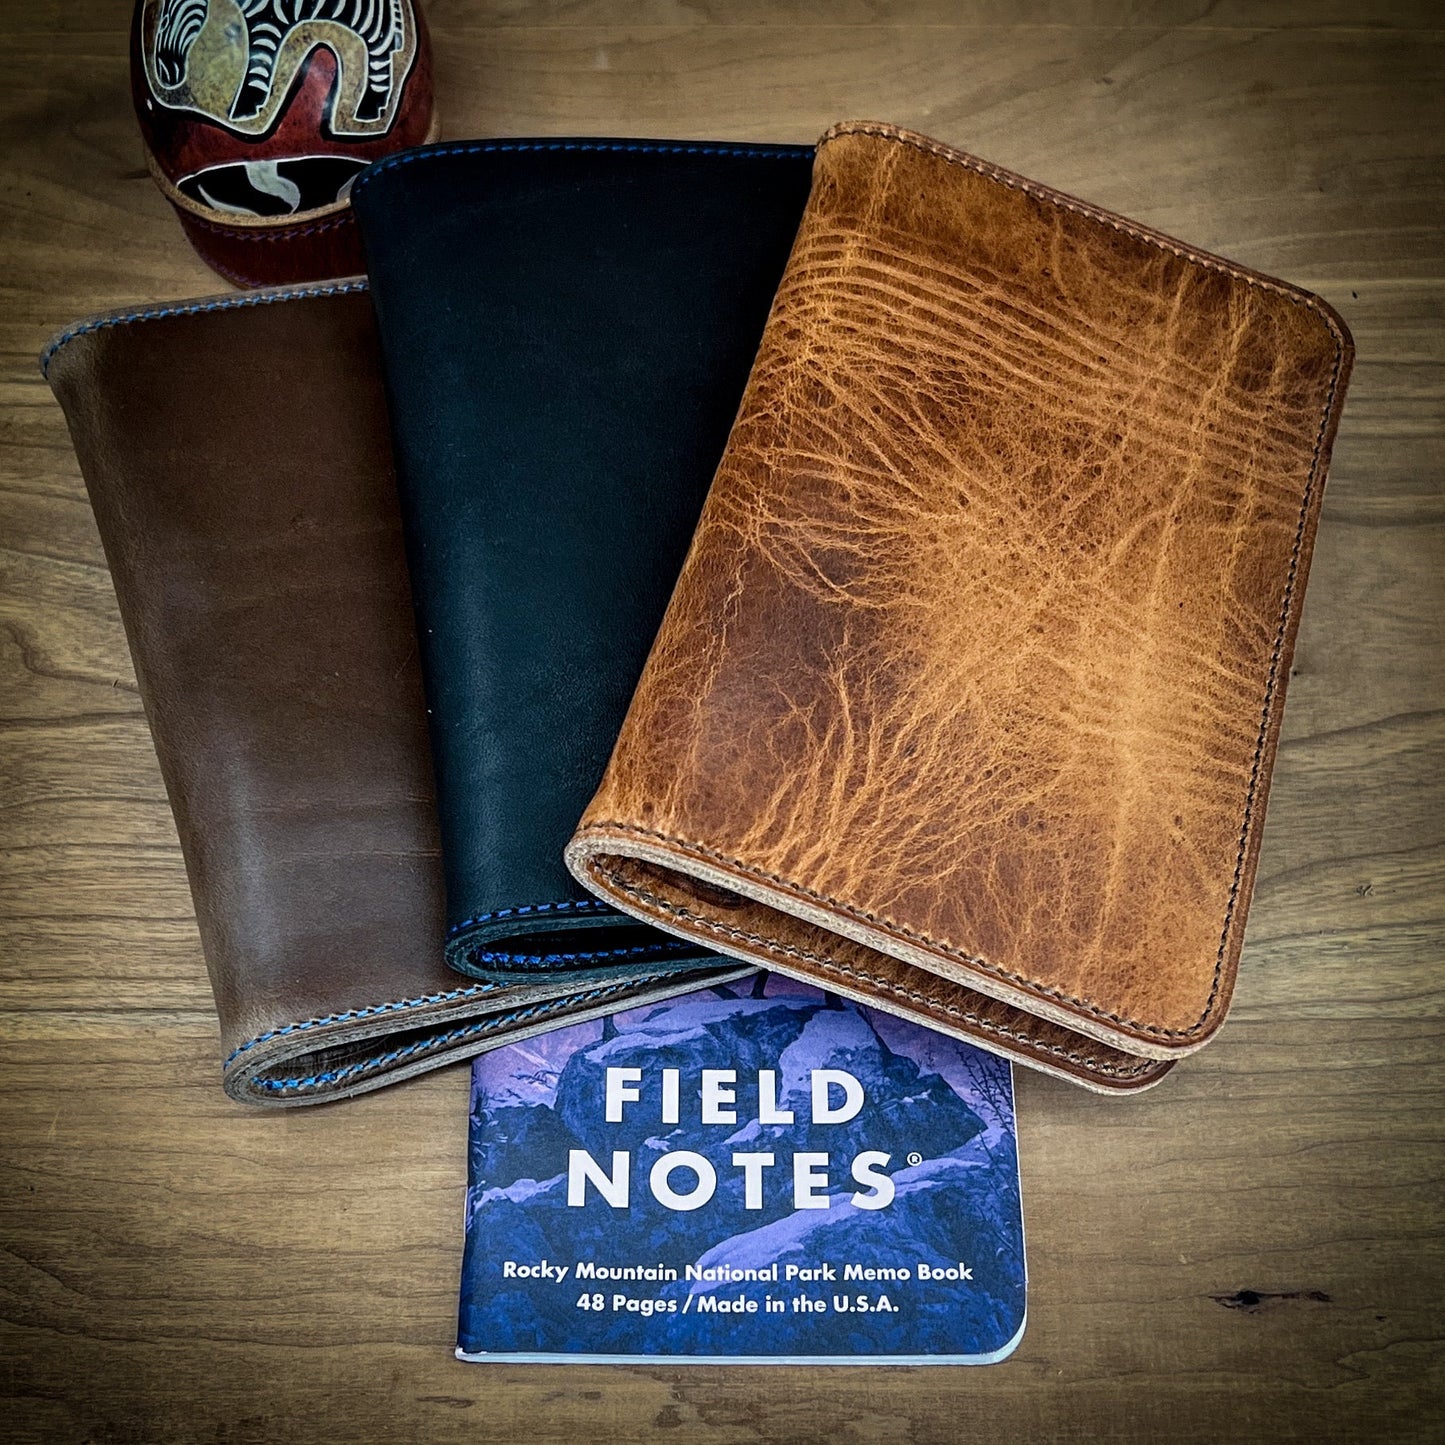 A set of three handmade Horween Leather notebook covers including Natural CXL Horween, Black CXL Horween and English Tan Horween leathers.  Handmade by Custom Leather and Pen in Houston, TX